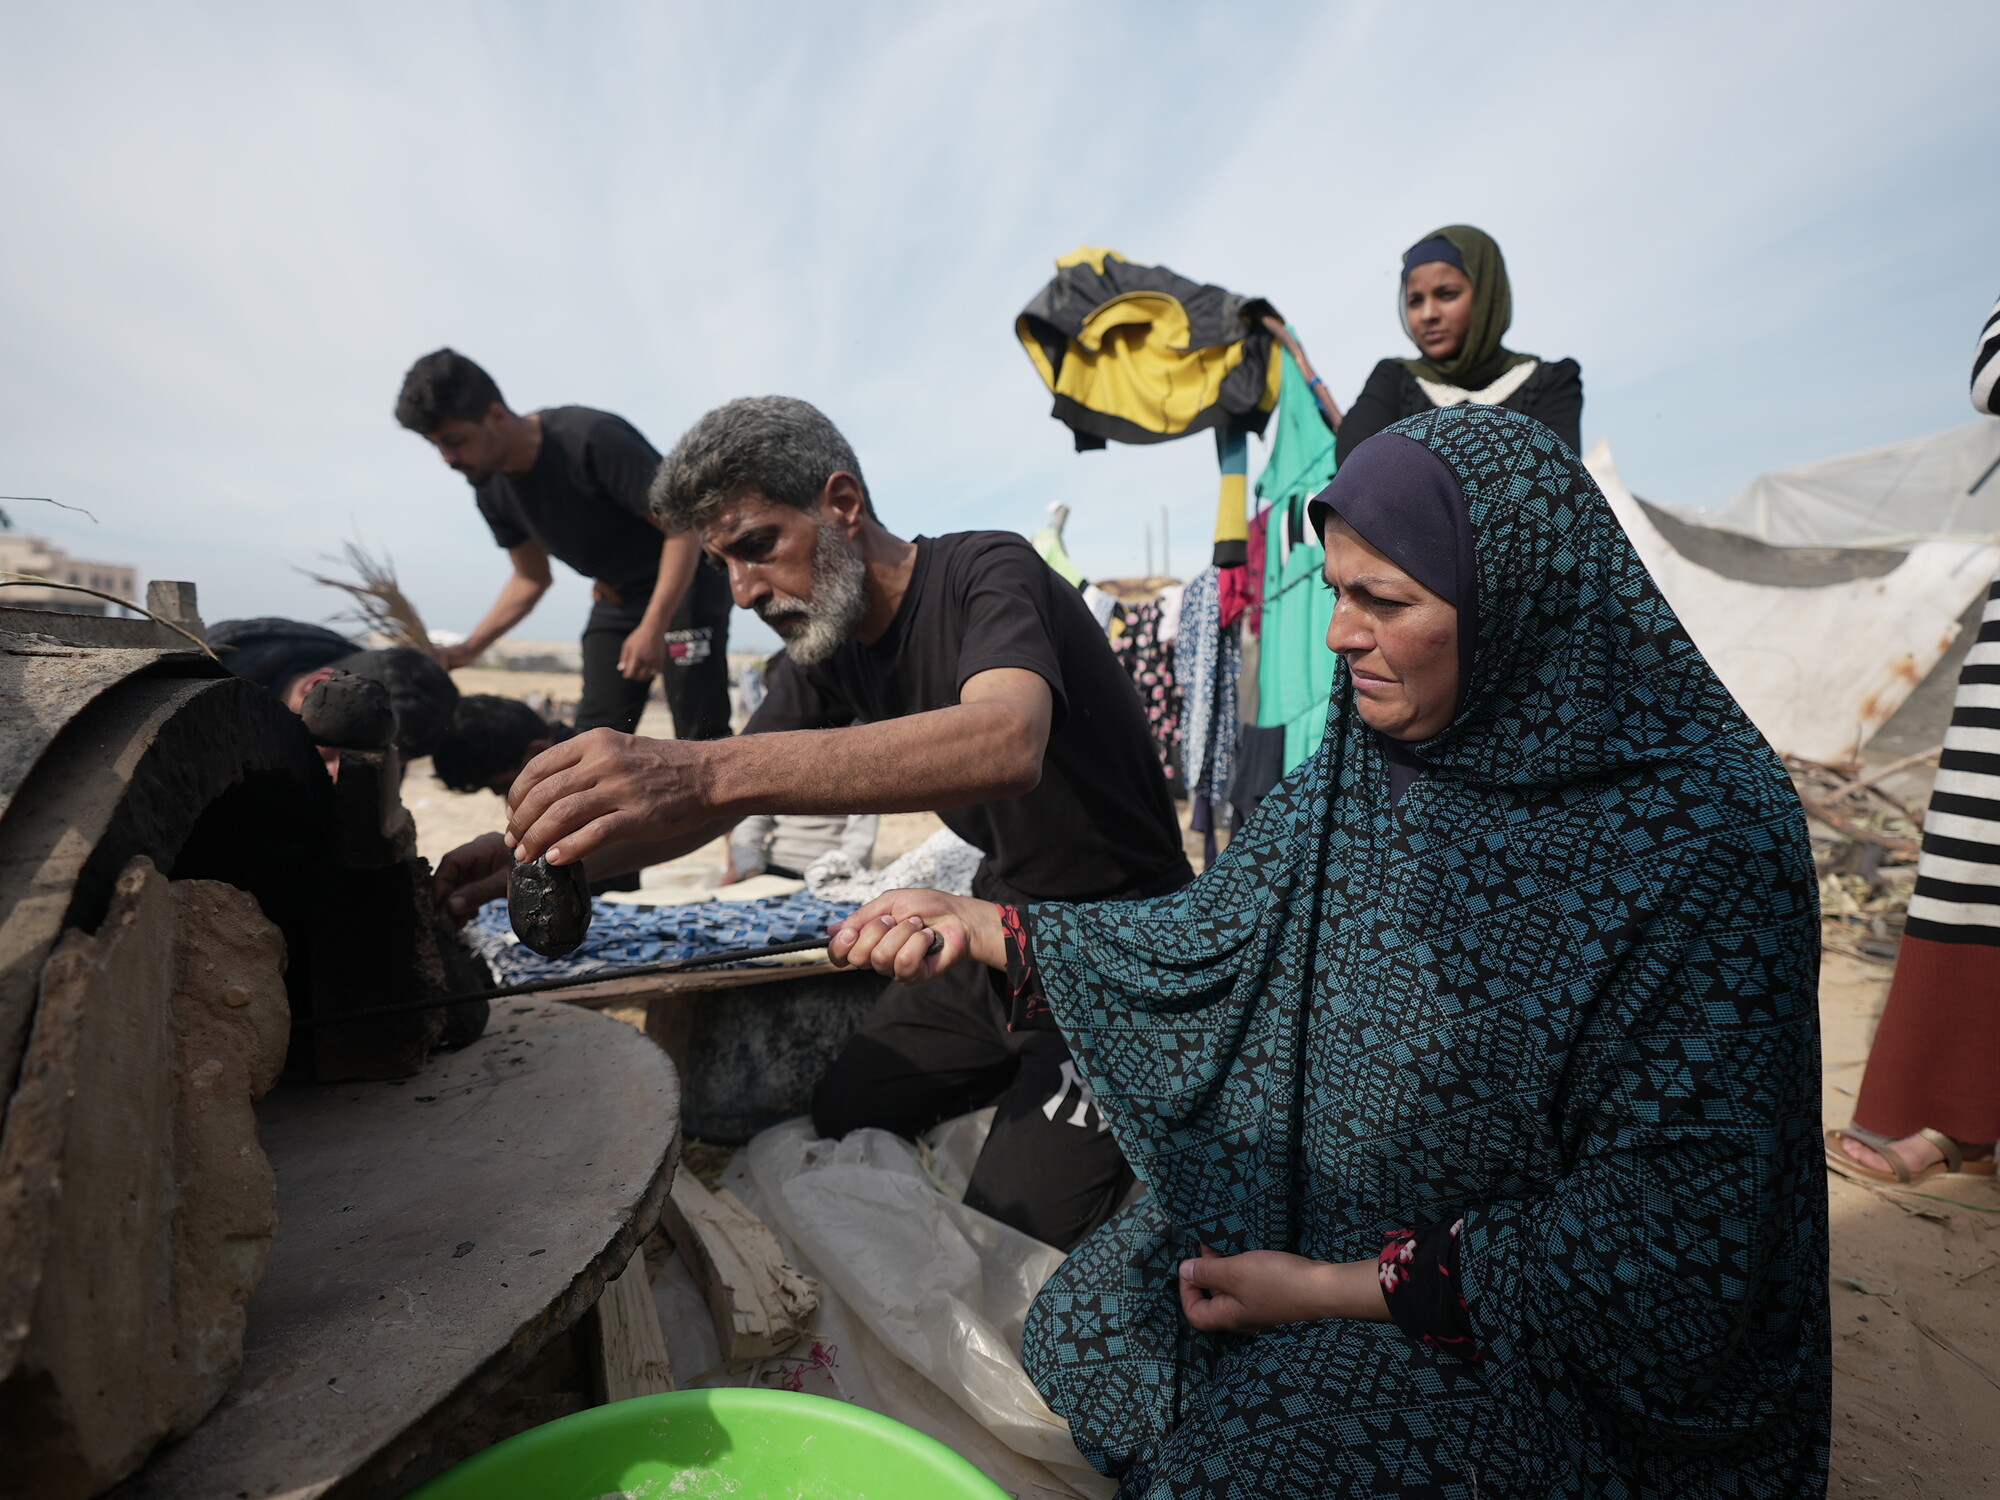 Mutaz* and his wife Muna* use the oven they made out of clay to make some bread.